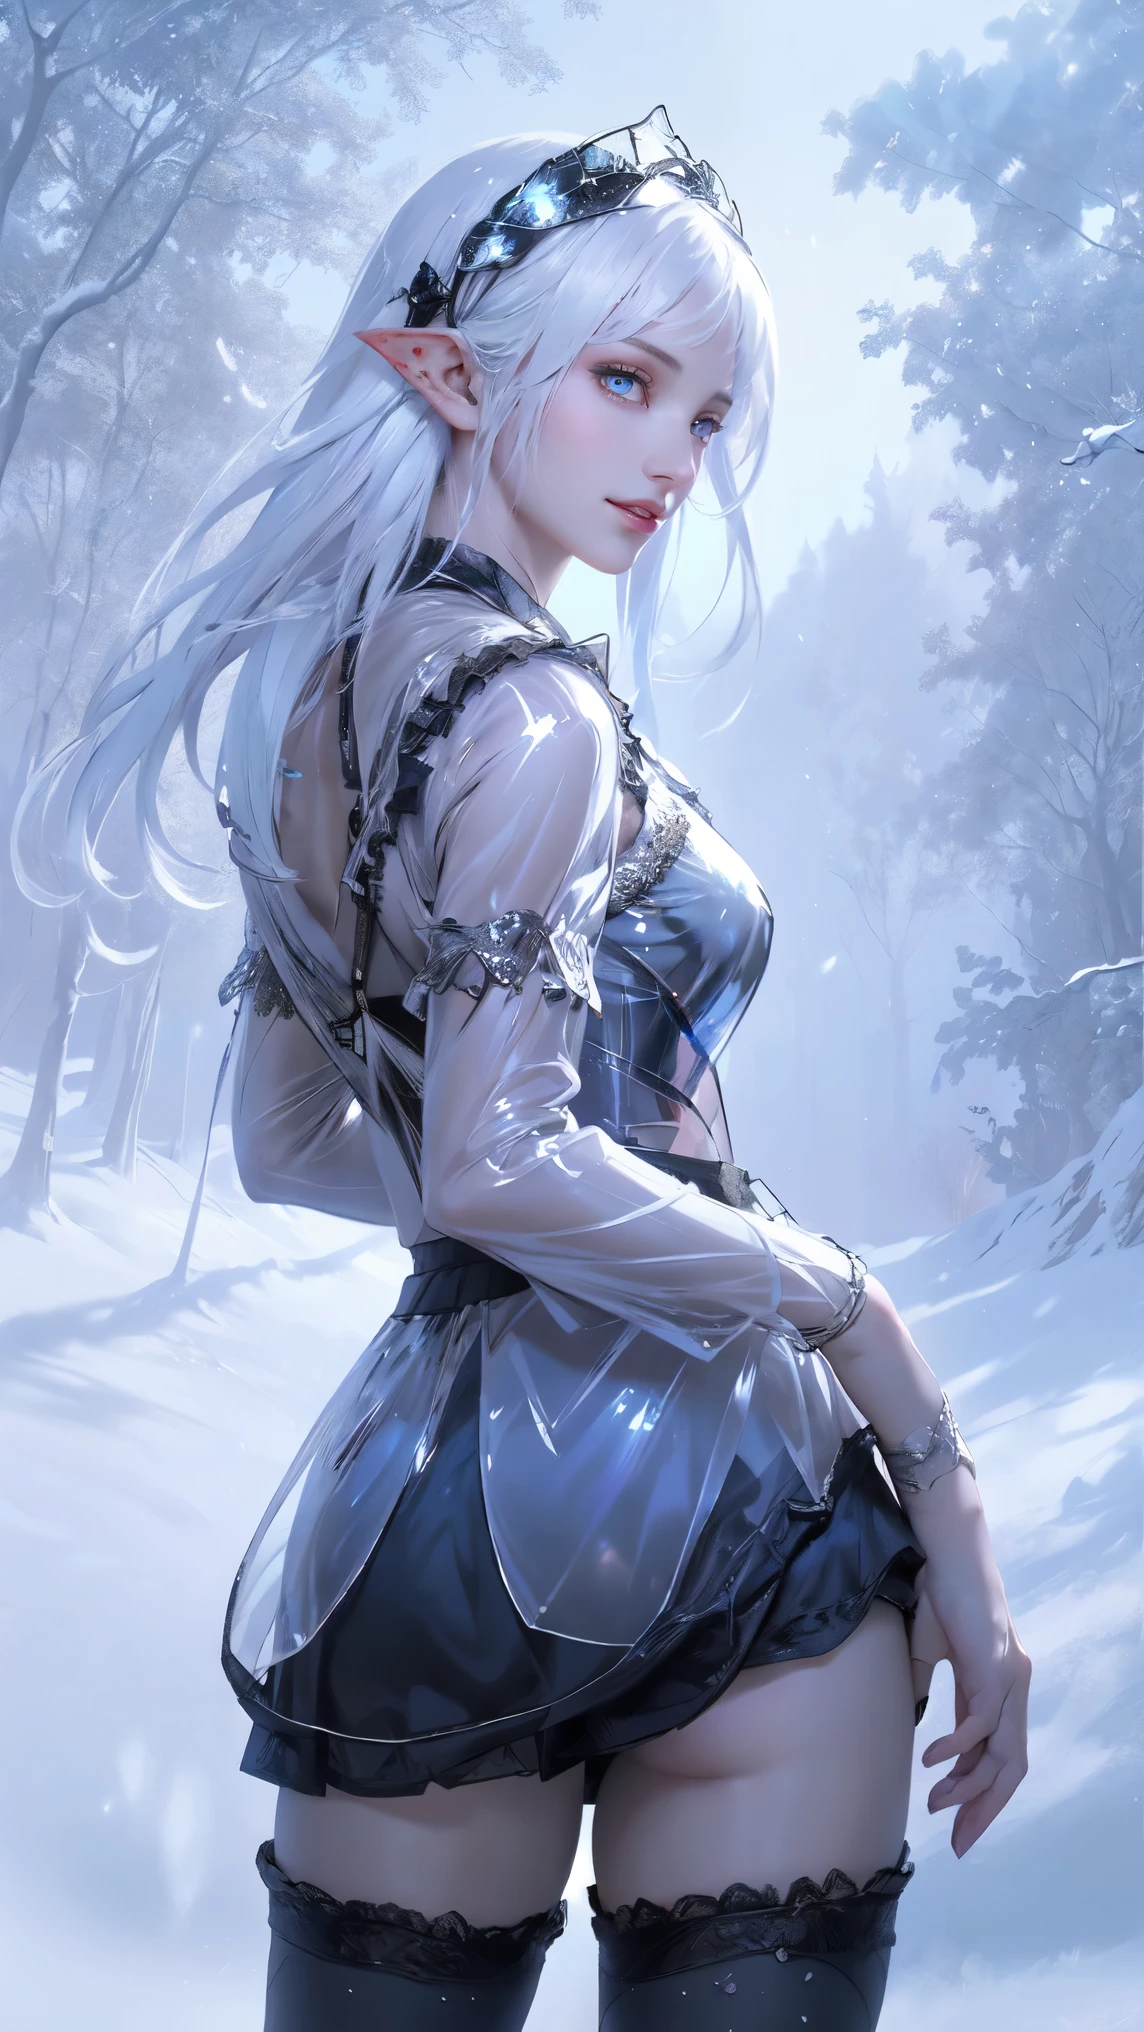 (Best Quality, A high resolution, Ultra - detailed, current), White, A world covered in silver, branches covered in snow, touch chill of winter, Snowflakes dance like elves, Turn the world into a silver fairy tale, chill, Quiet and beautiful snow scene., Cozy Quiet, (seaArt 2.1), (background frozen white trees snow falling:1.4) , (beautiful blue eyes big black stones:1.4) , (cowboy pose), (realistic) ,8K high quality detailed art, Fanart Best ArtStation, Fantasy art style, (black lolita short pulled-up transparent miniskirt:1.4), (showing pussy),(hairy pussy), stocking bra, leggings white,